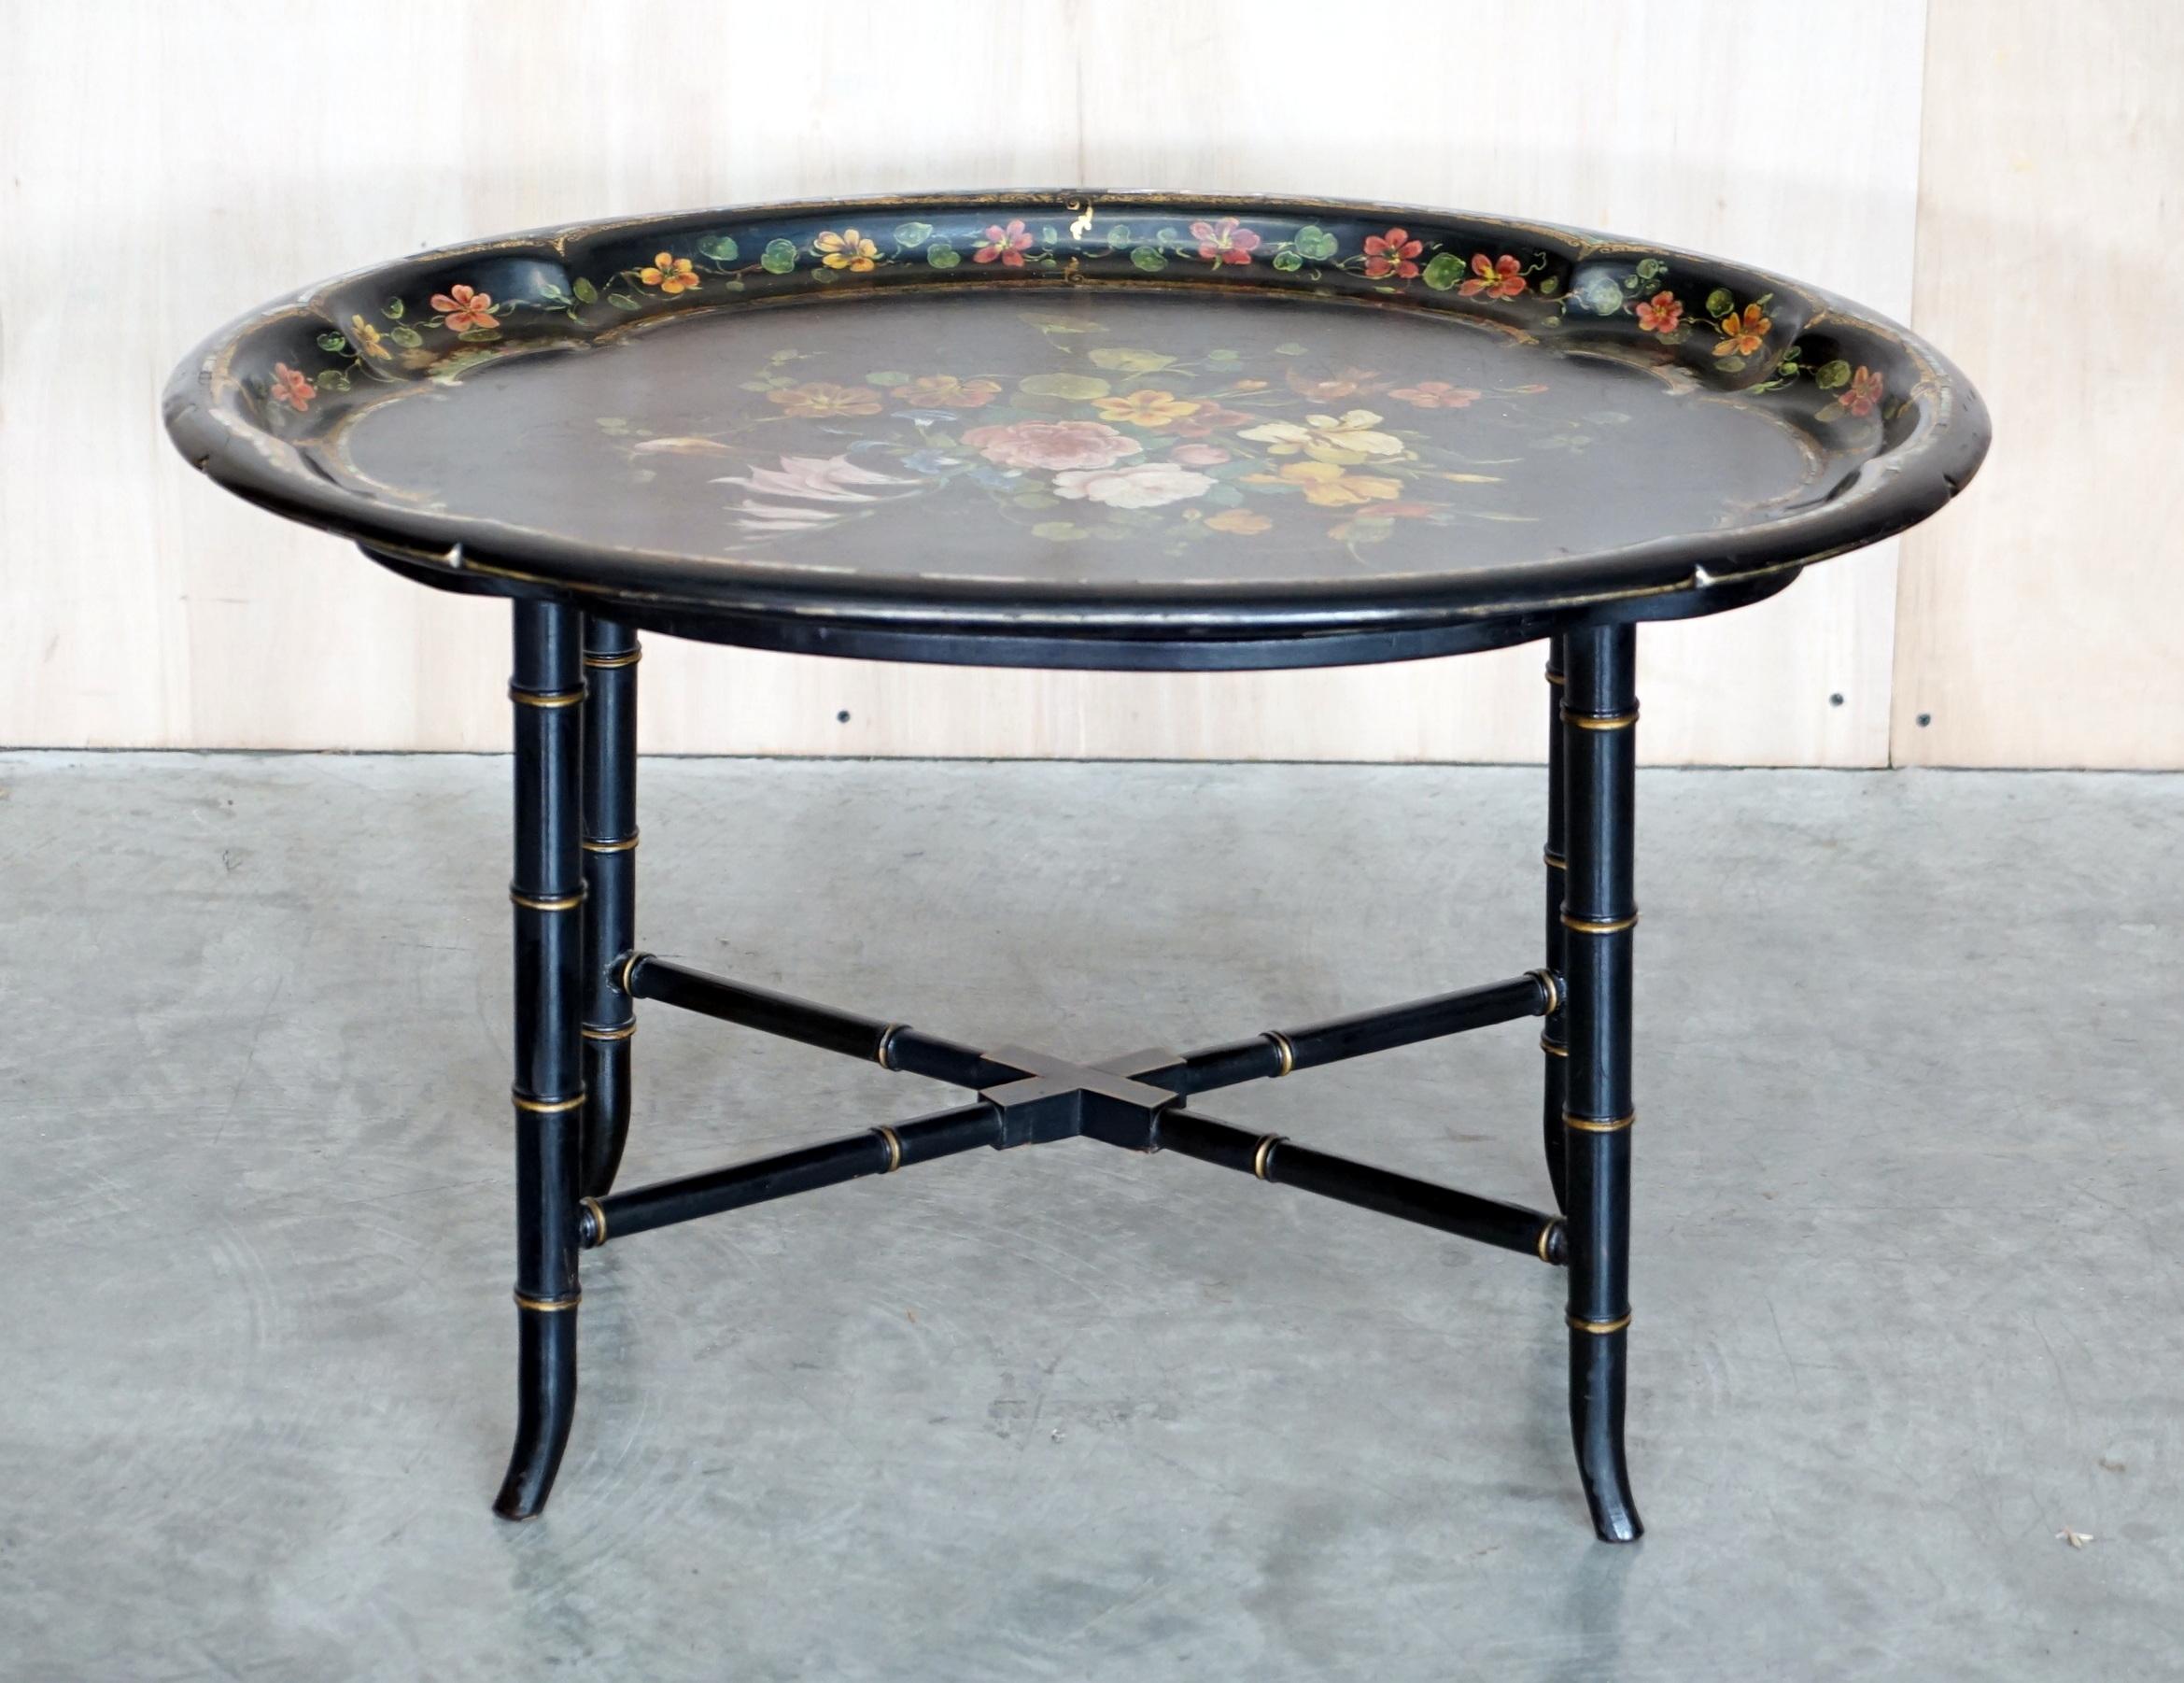 English Antique Regency circa 1810-1820 Mother of Pearl Inlaid Hand Painted Tray Table